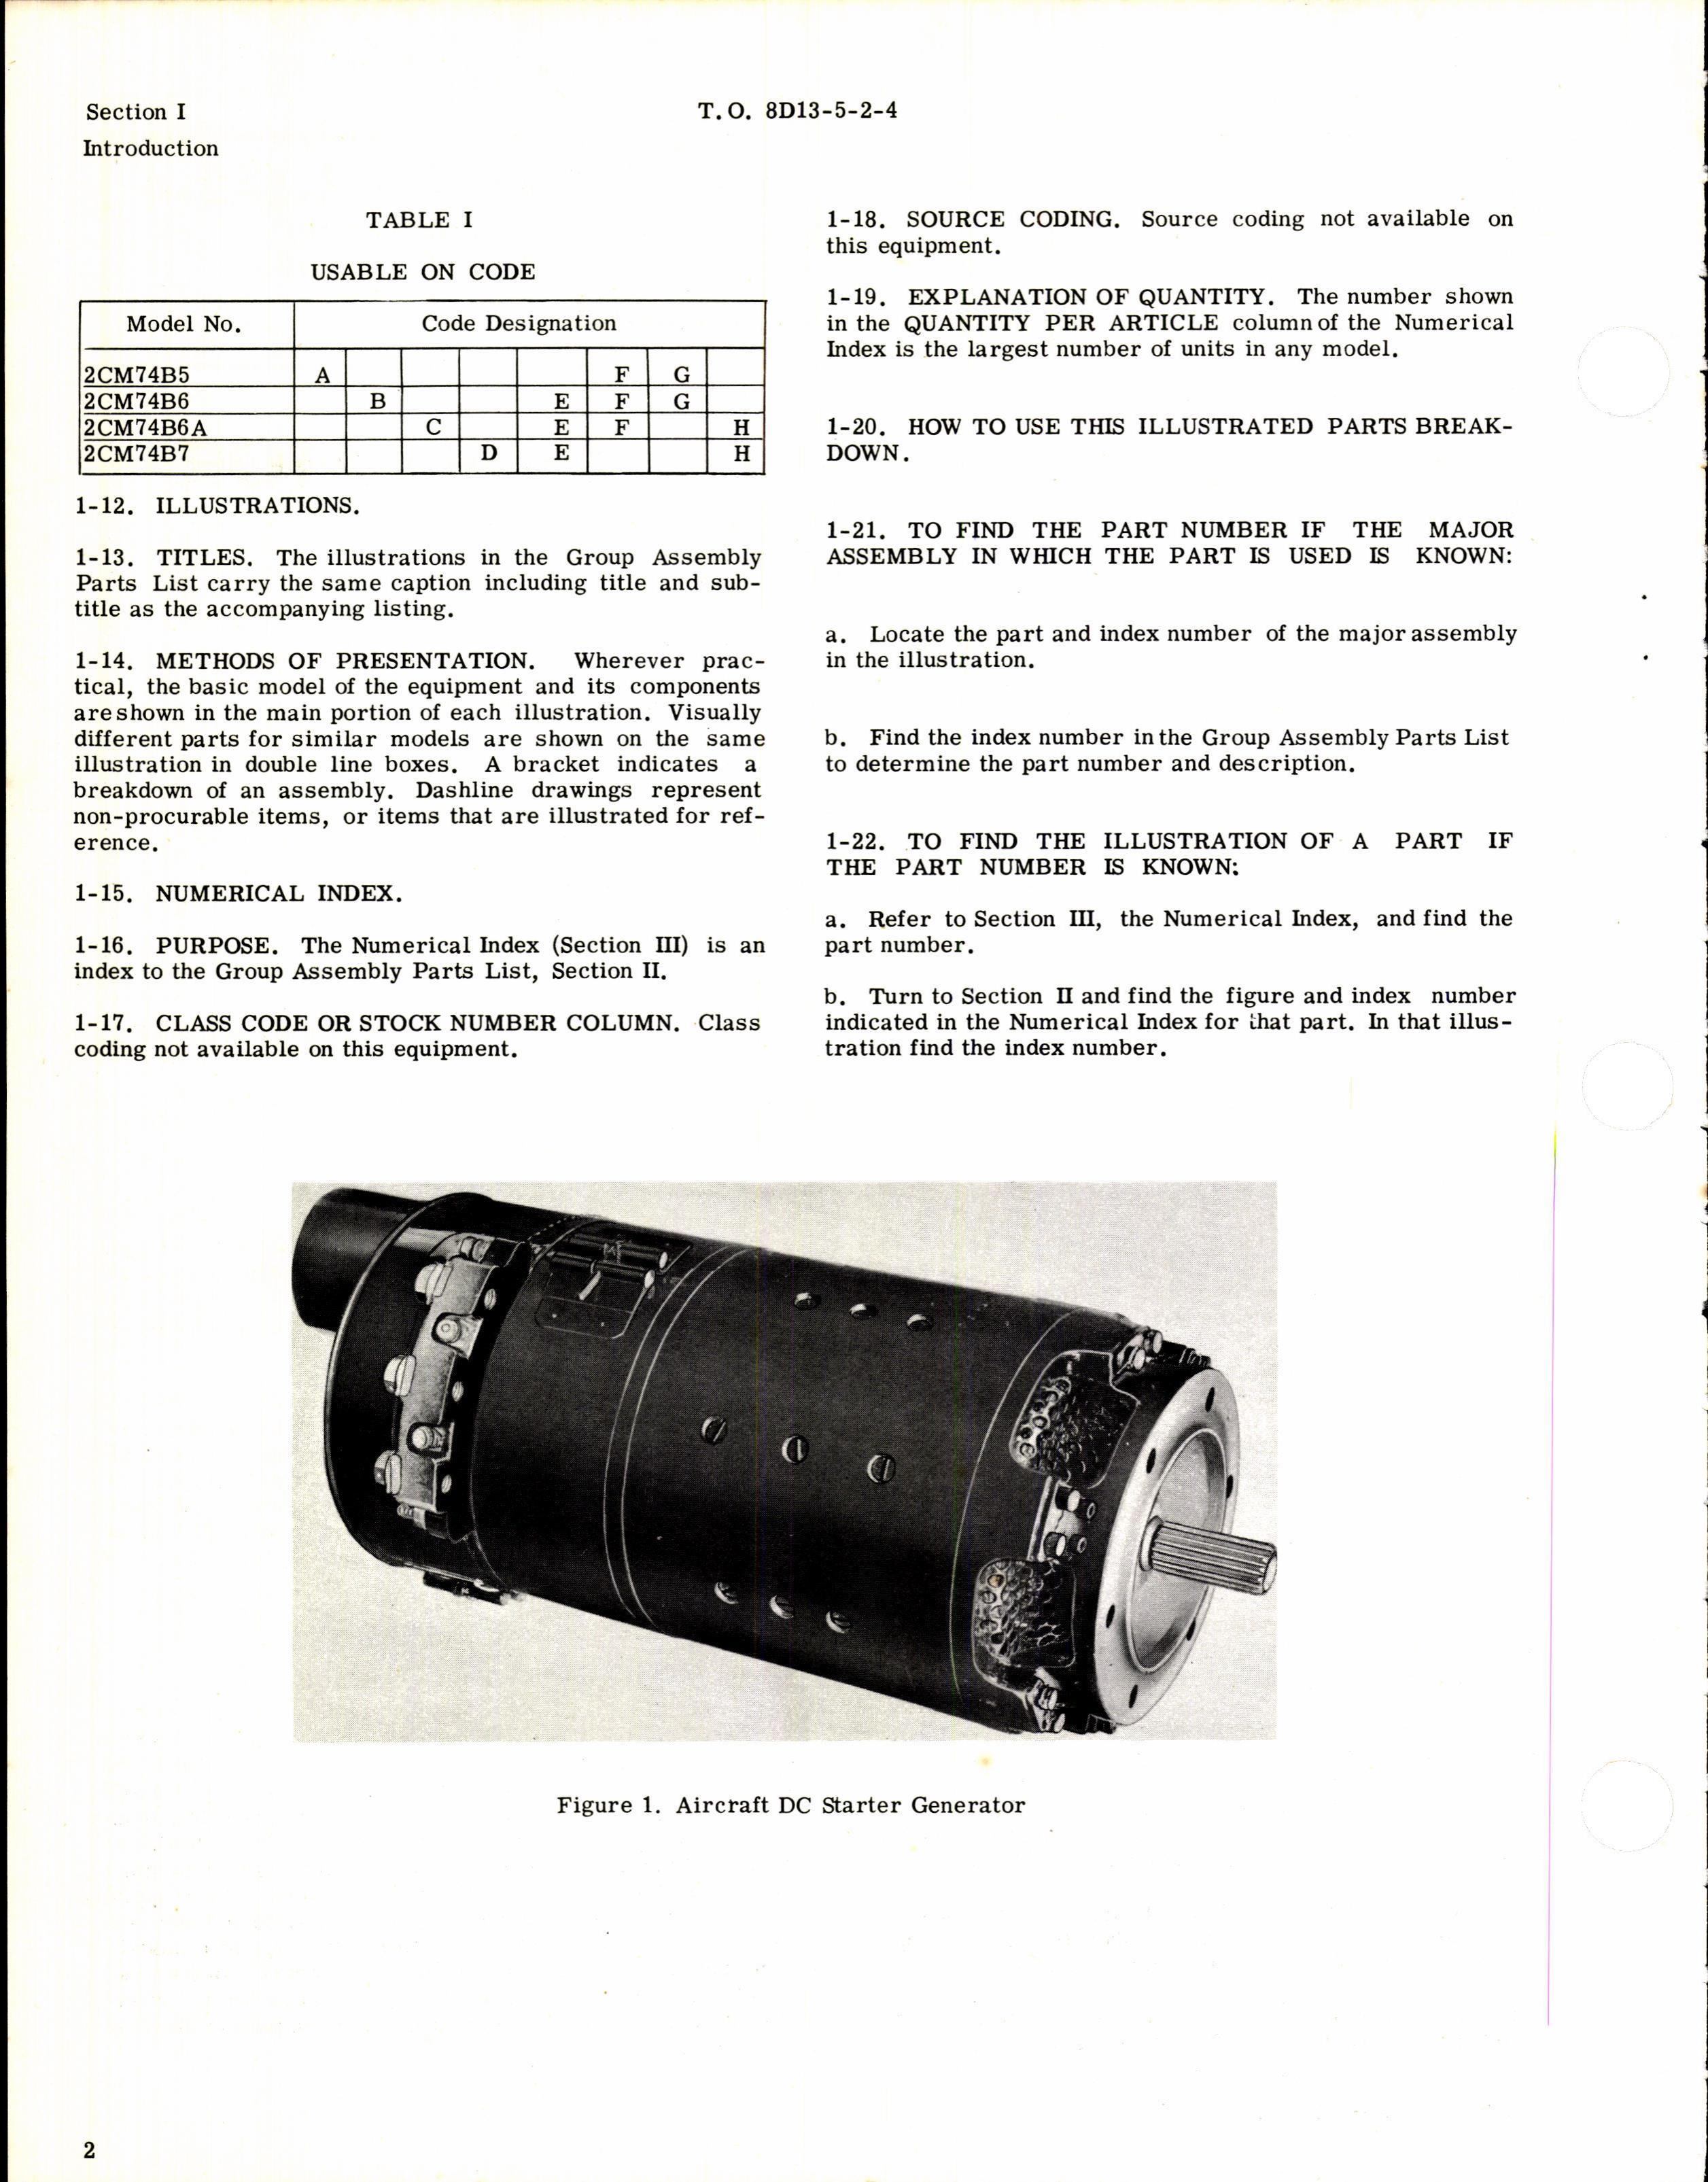 Sample page 2 from AirCorps Library document: Illustrated Parts Breakdown for GE Aircraft DC Starter Generator